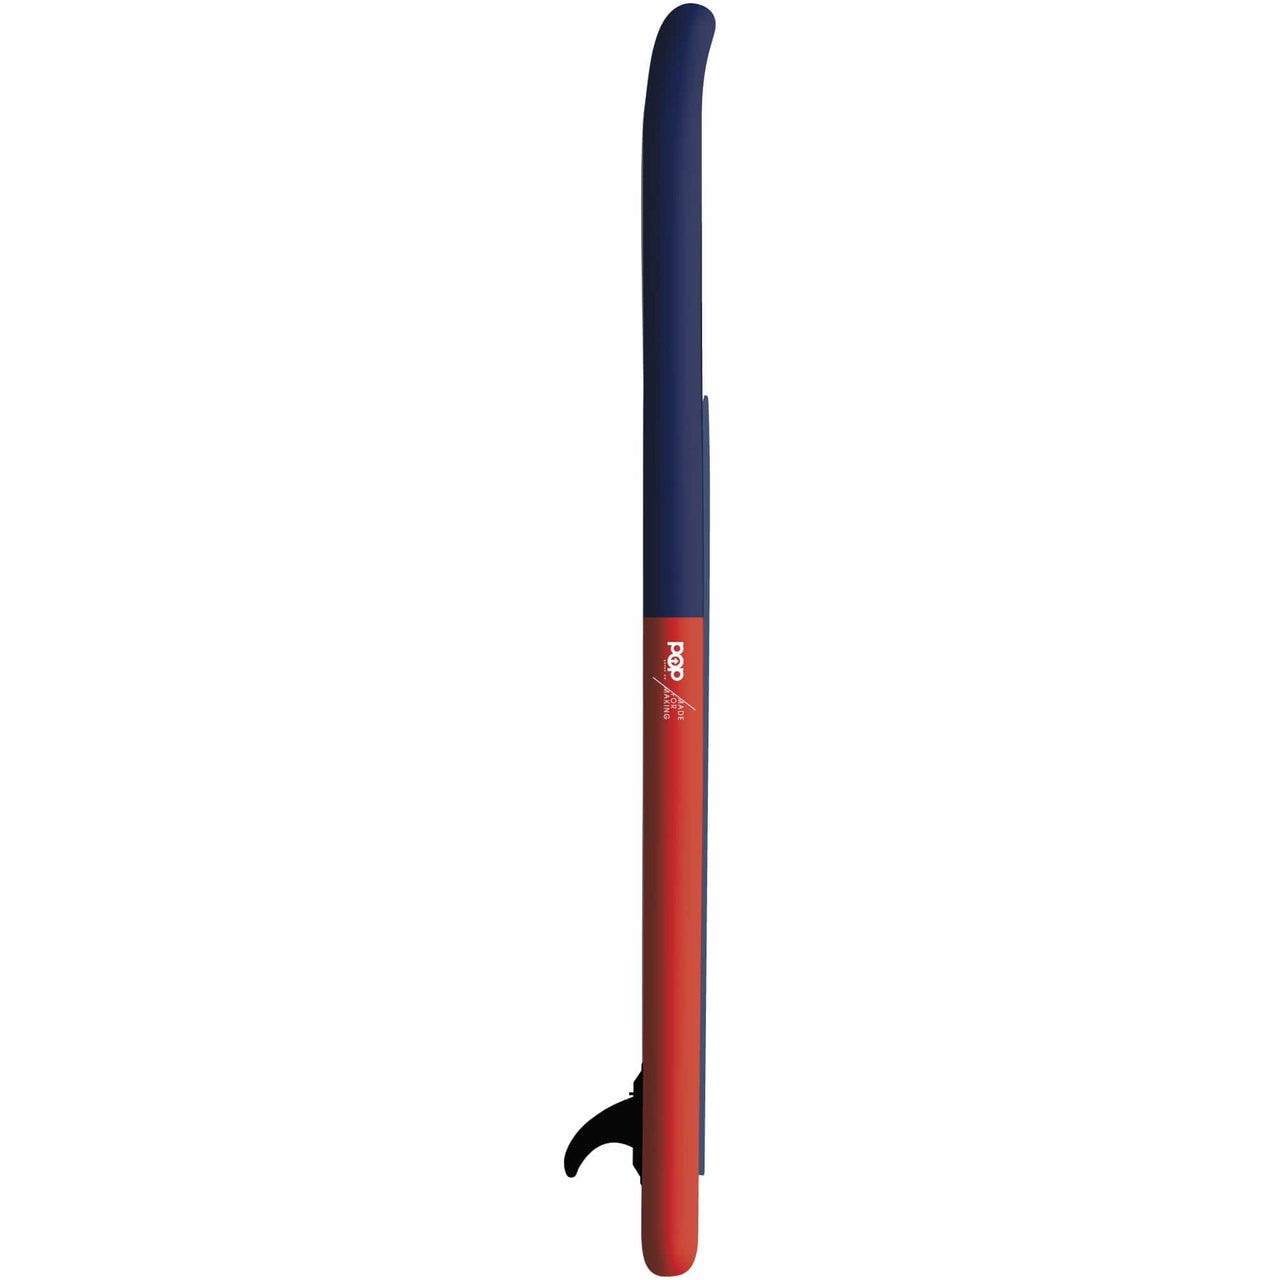 POP Board Co 11'6" El Capitán Red/Blue Stand Up Paddle Board - Good Wave